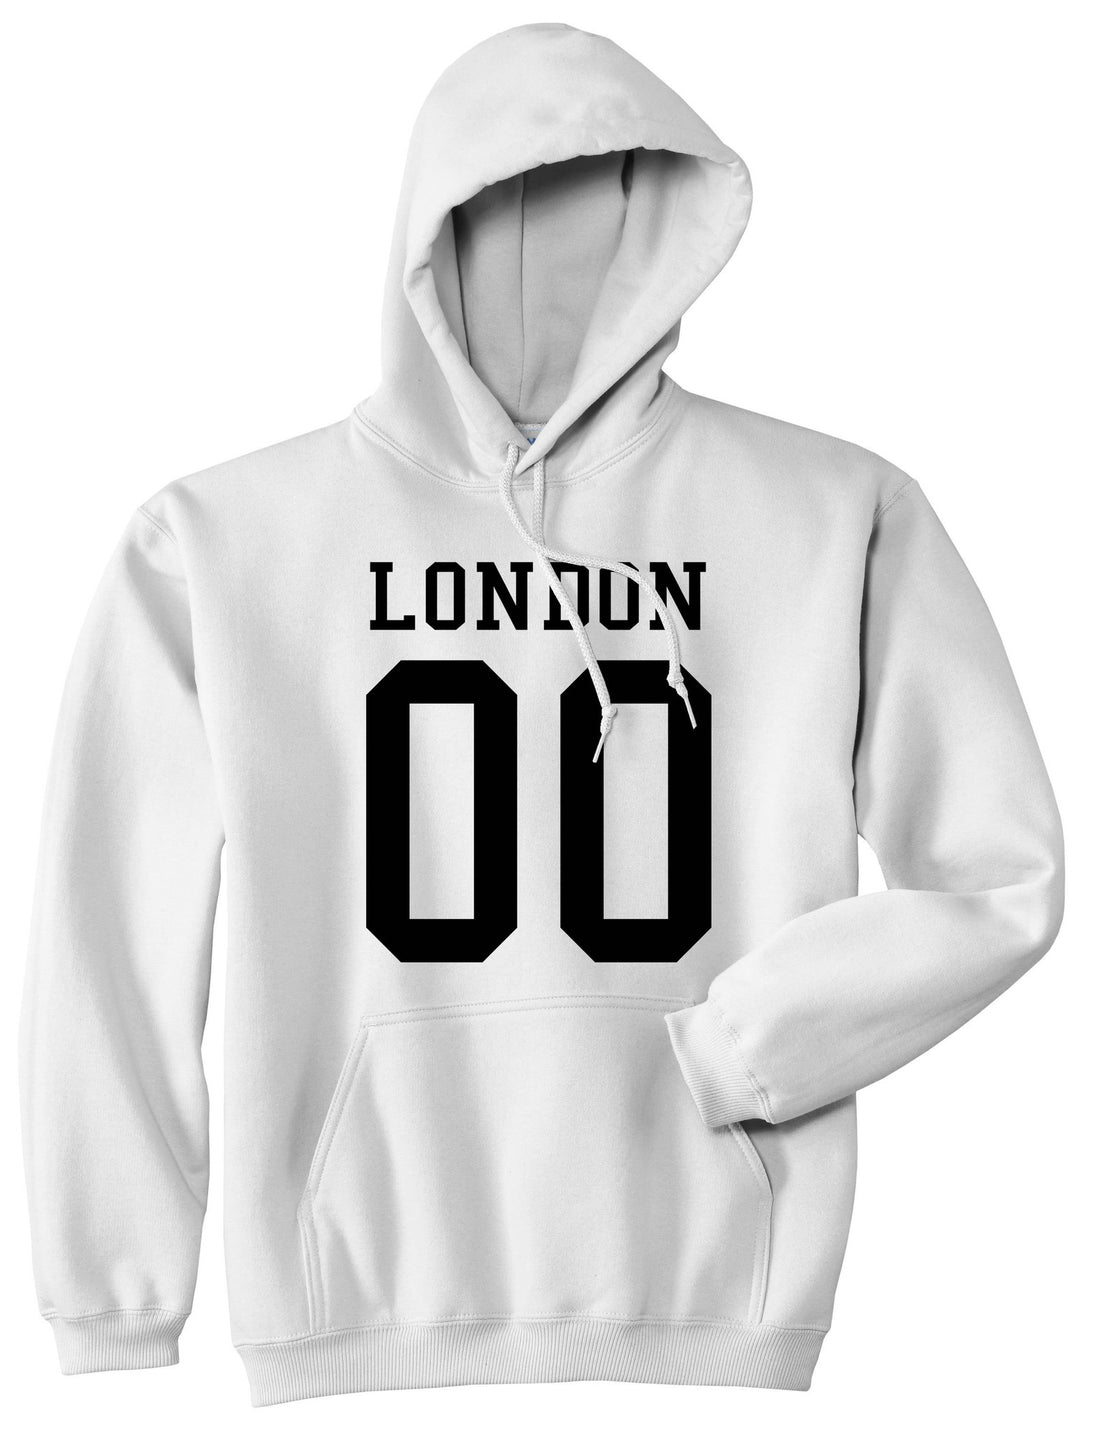 London Team 00 Jersey Boys Kids Pullover Hoodie Hoody in White By Kings Of NY